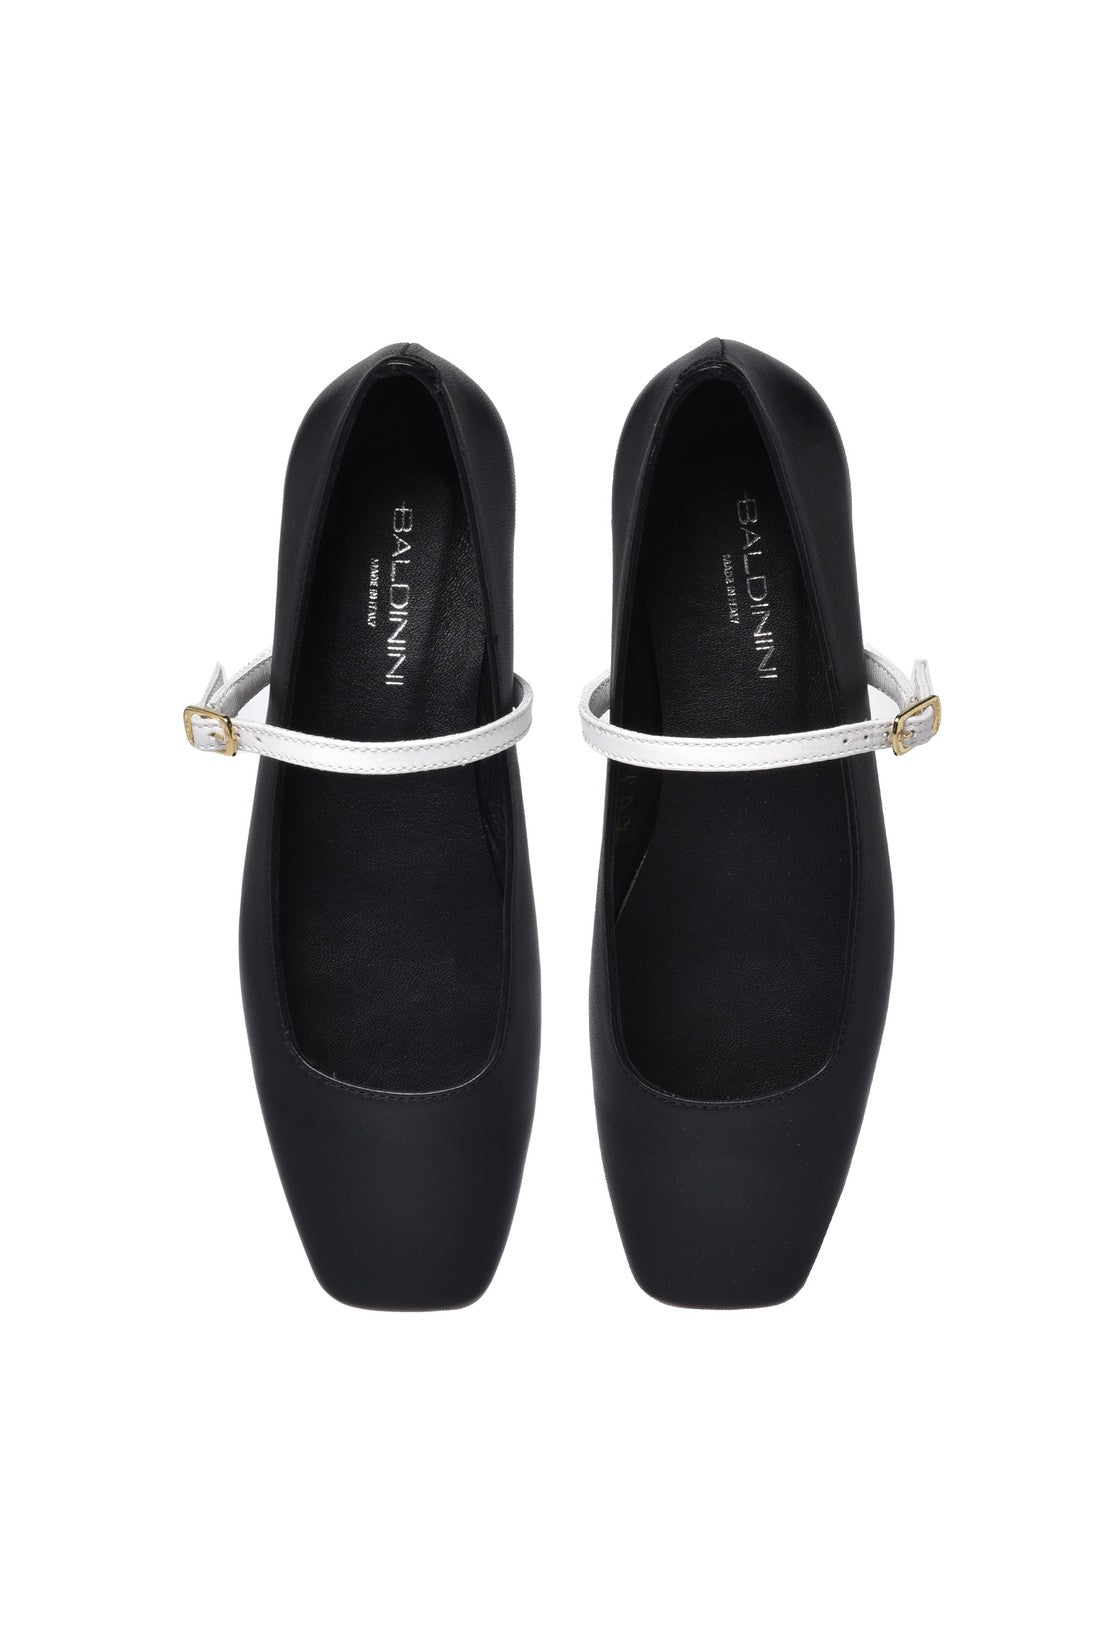 Ballerina pump in black and white nappa leather